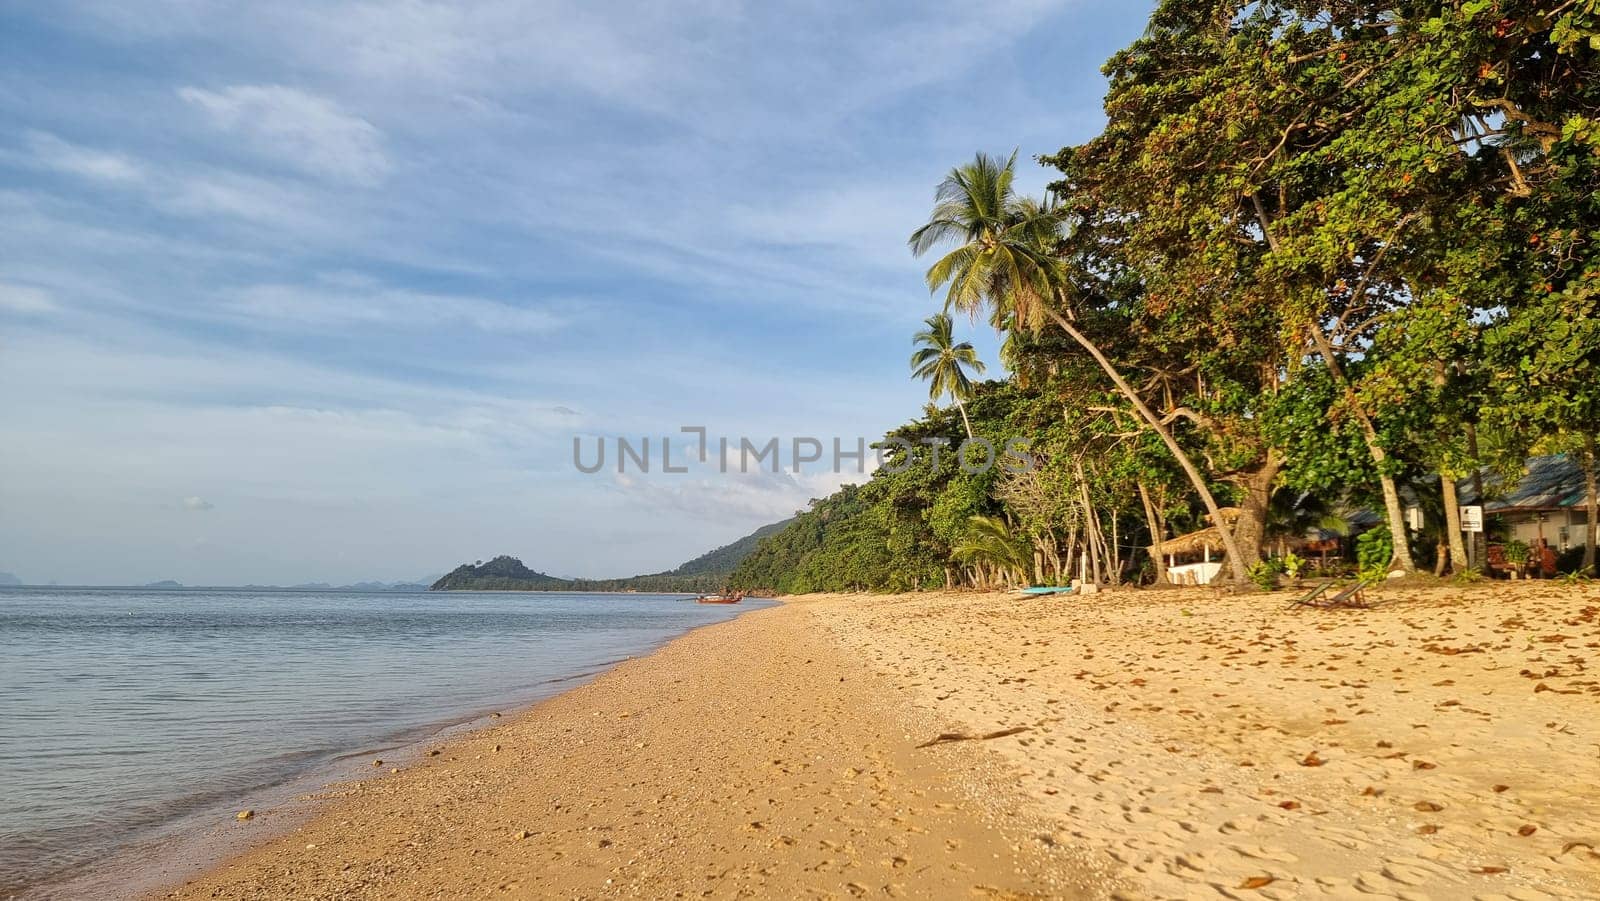 A tranquil scene of a sandy beach stretching along the ocean, lined with tall swaying palm trees under a clear blue sky by fokkebok